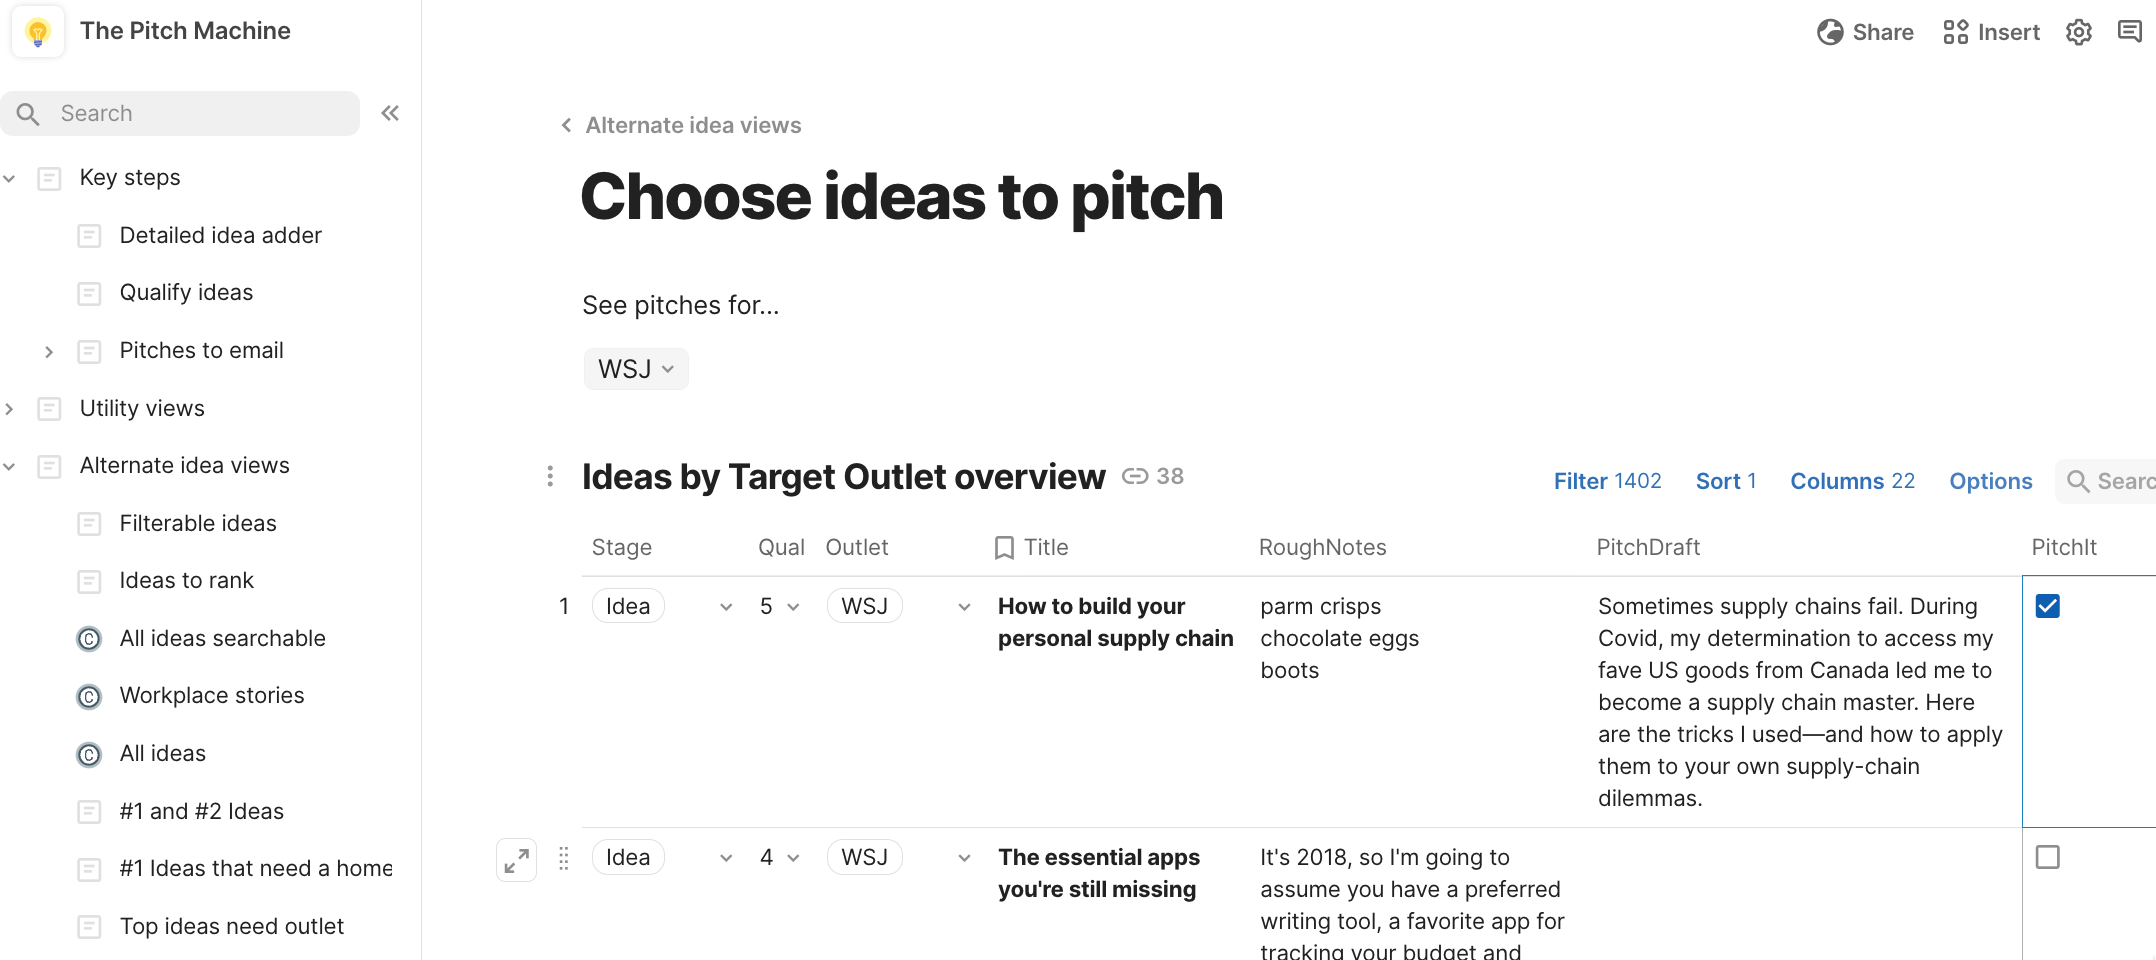 Screenshot of "Choose ideas to pitch" shows row for WSJ story idea with checkbox for when it's ready to pitch.